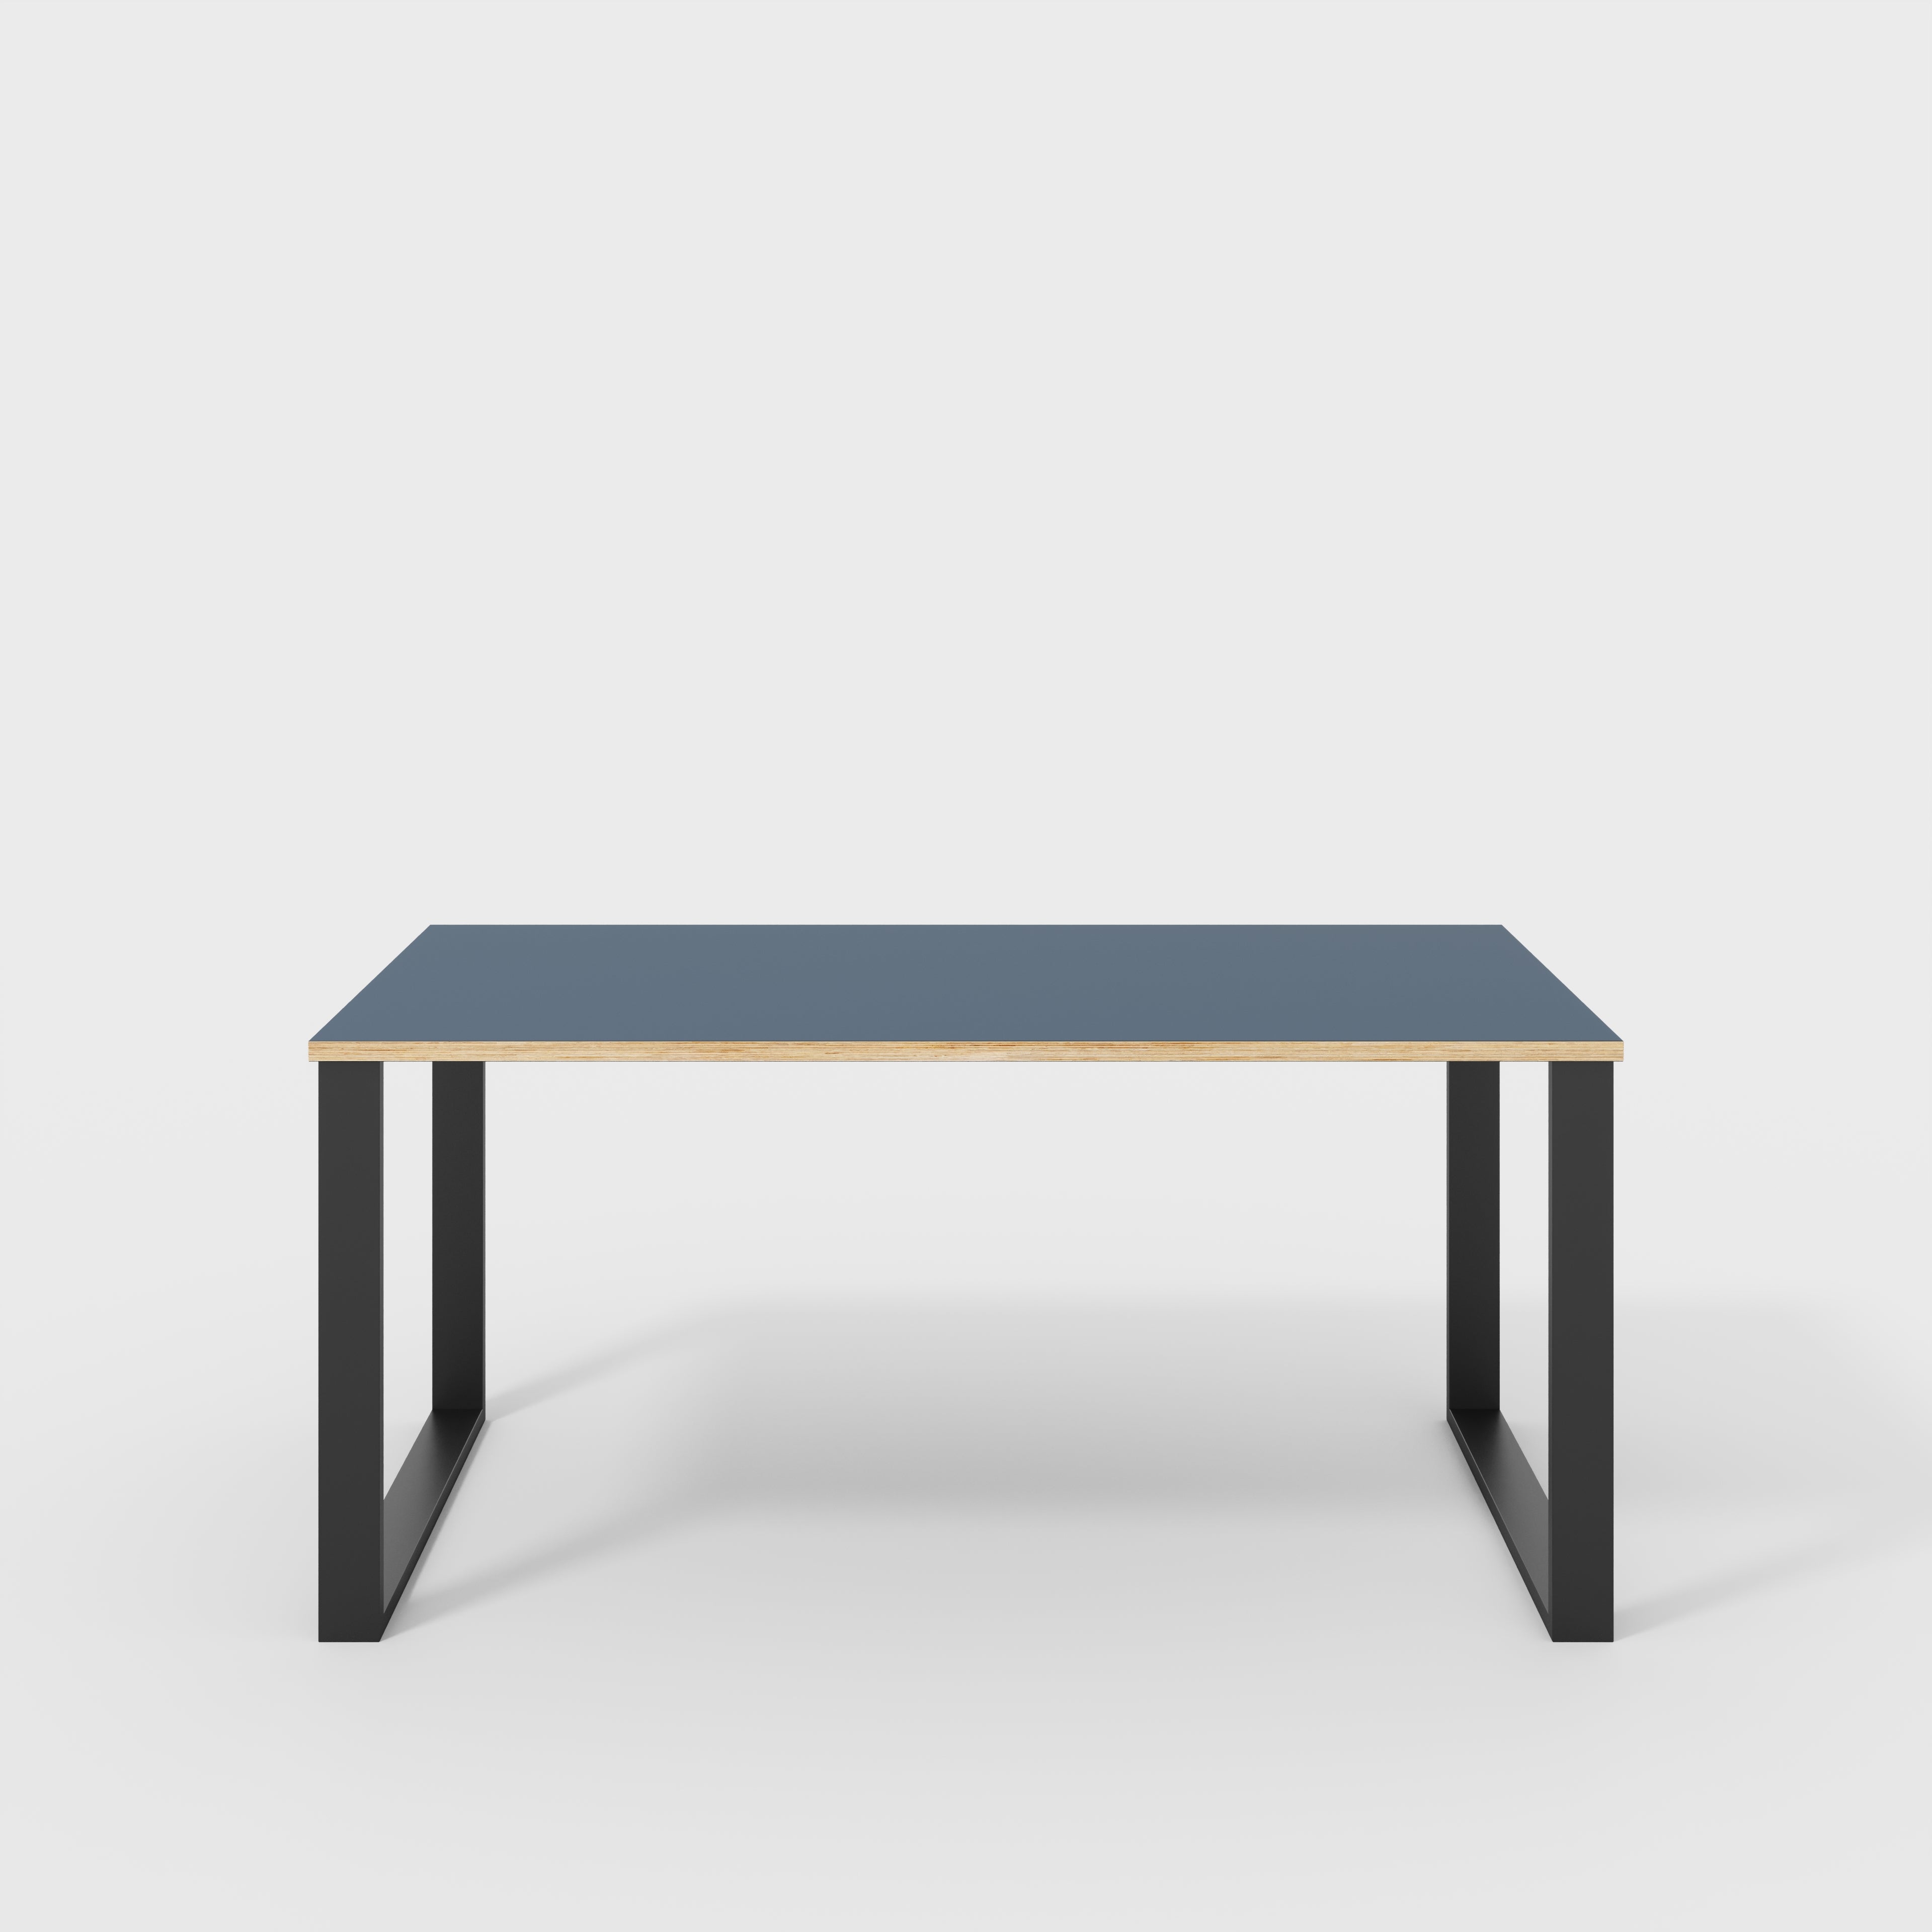 Table with Black Industrial Legs - Formica Night Sea Blue - 1600(w) x 800(d)